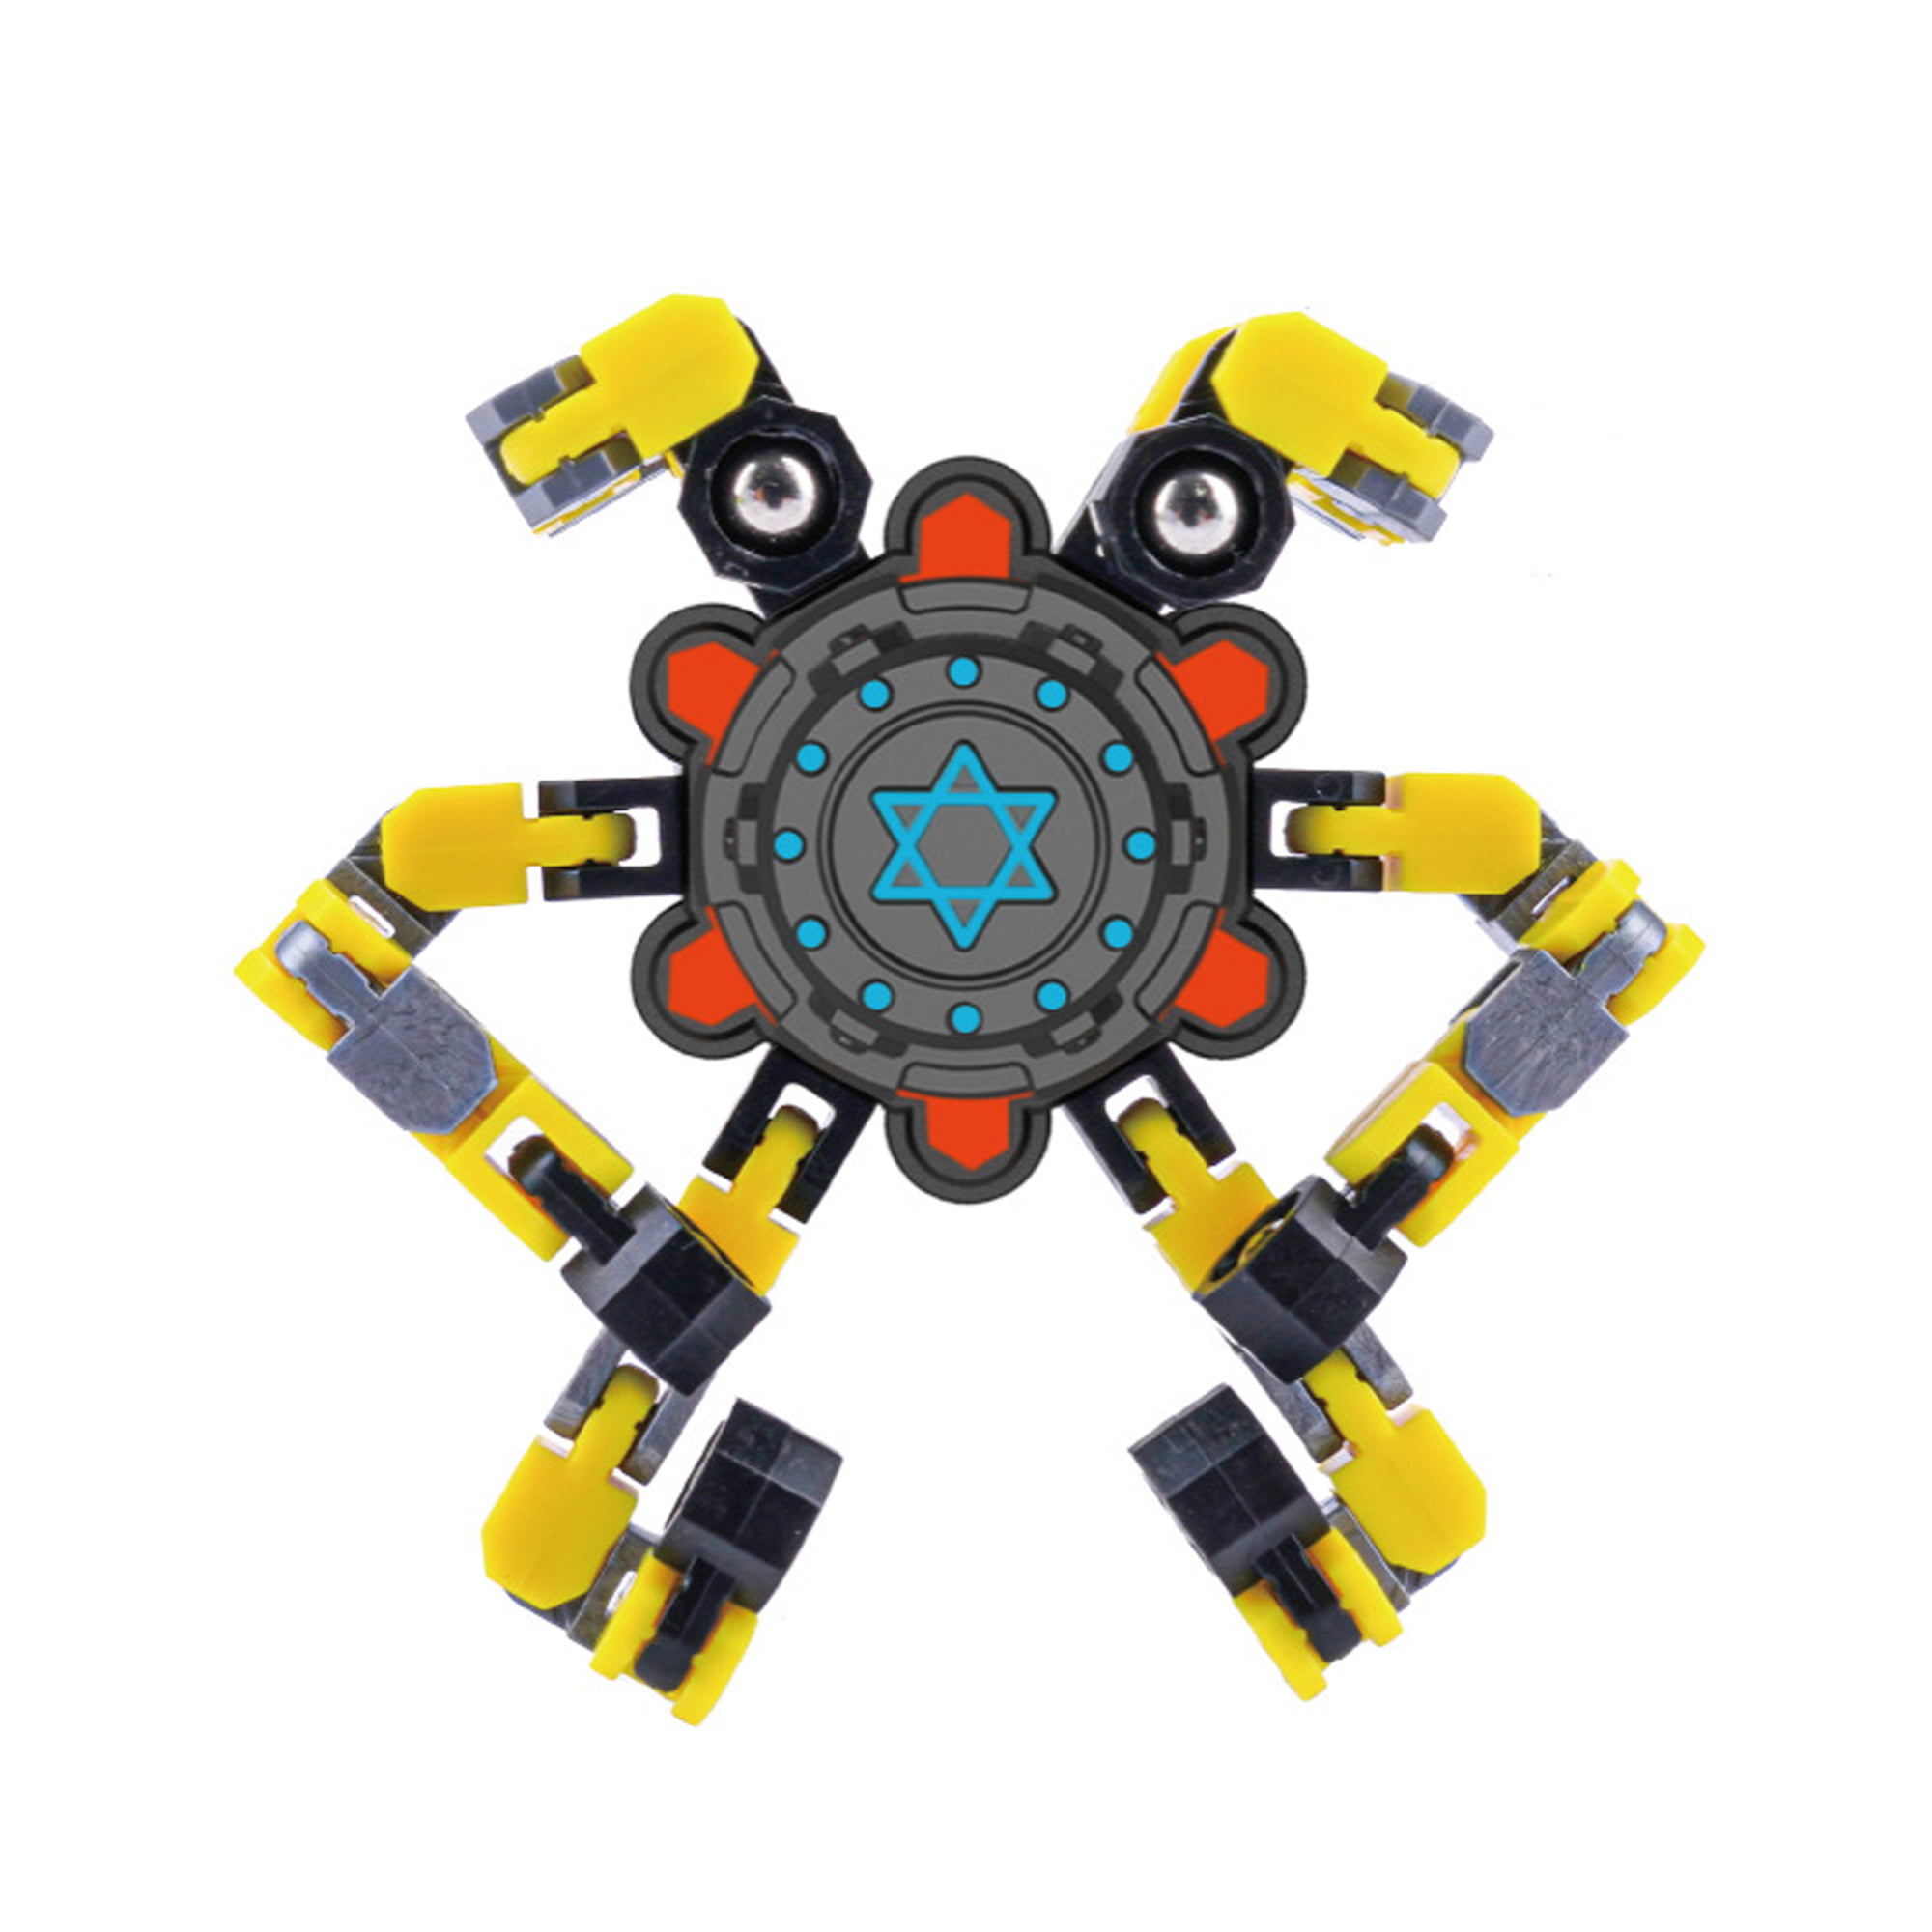 Fingertip Spinning Top Deformable Stress Relief Toy Transformable Mechanical Hot 